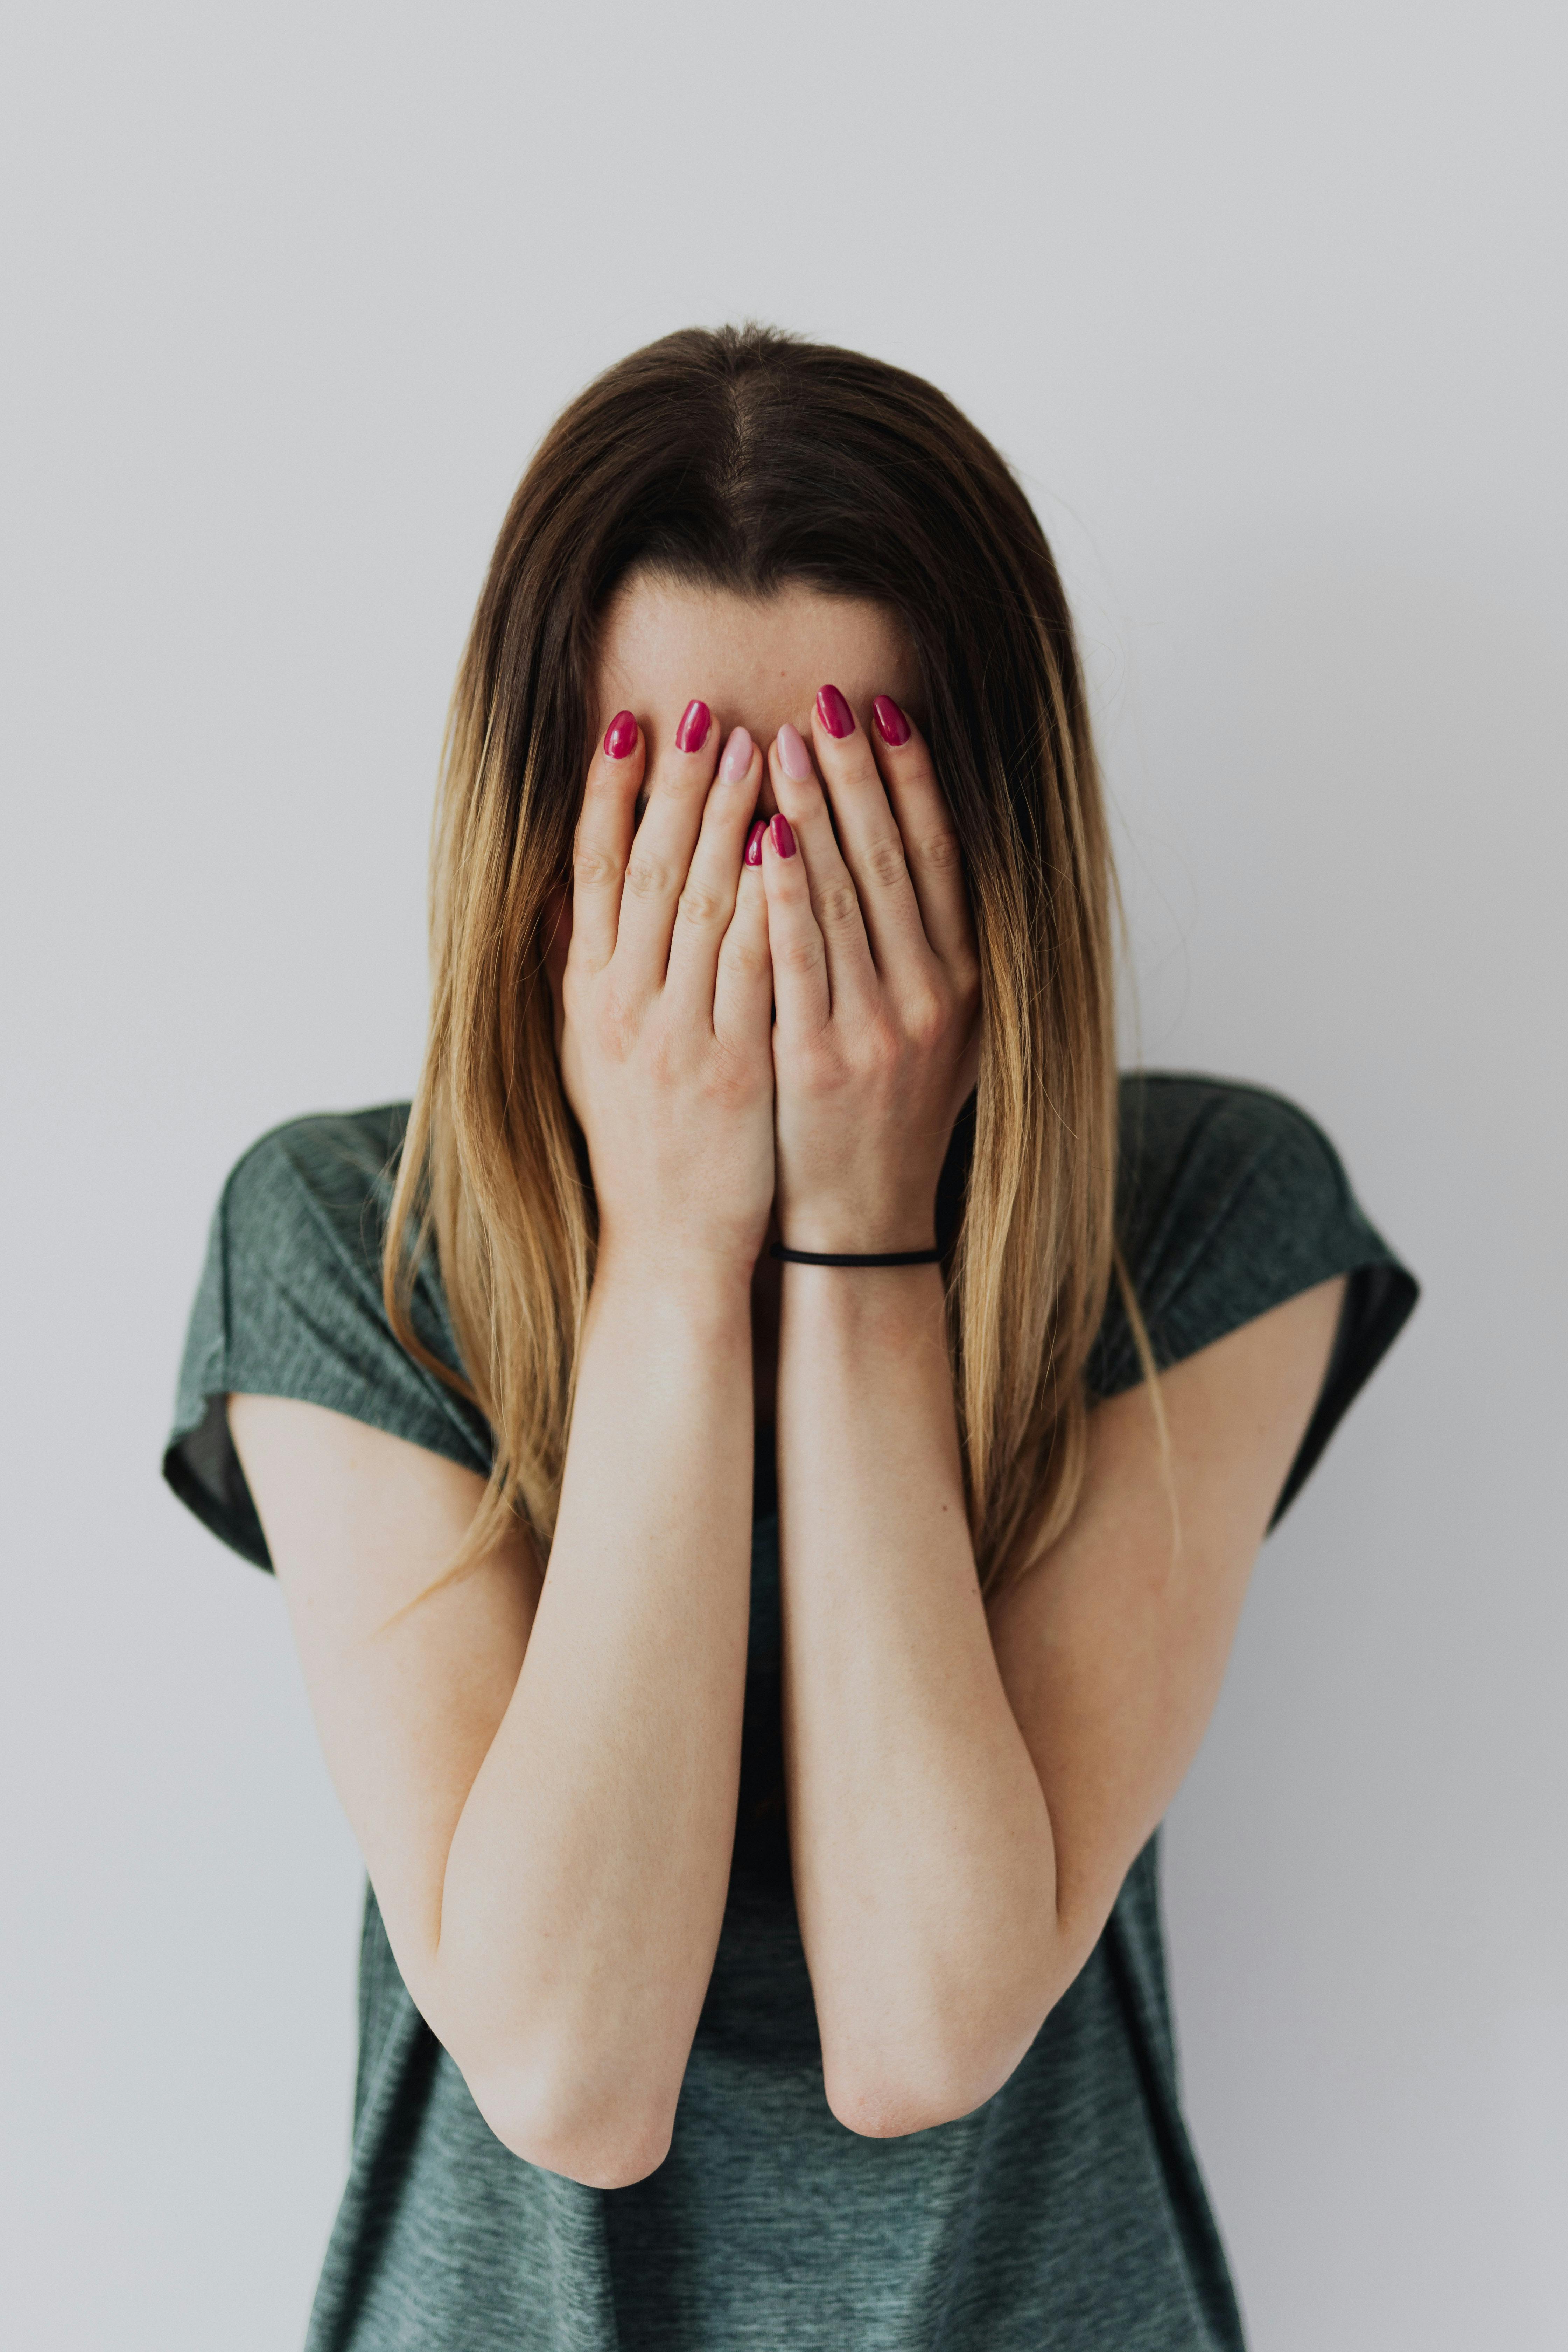 A shy woman covering her face | Source: Pexels